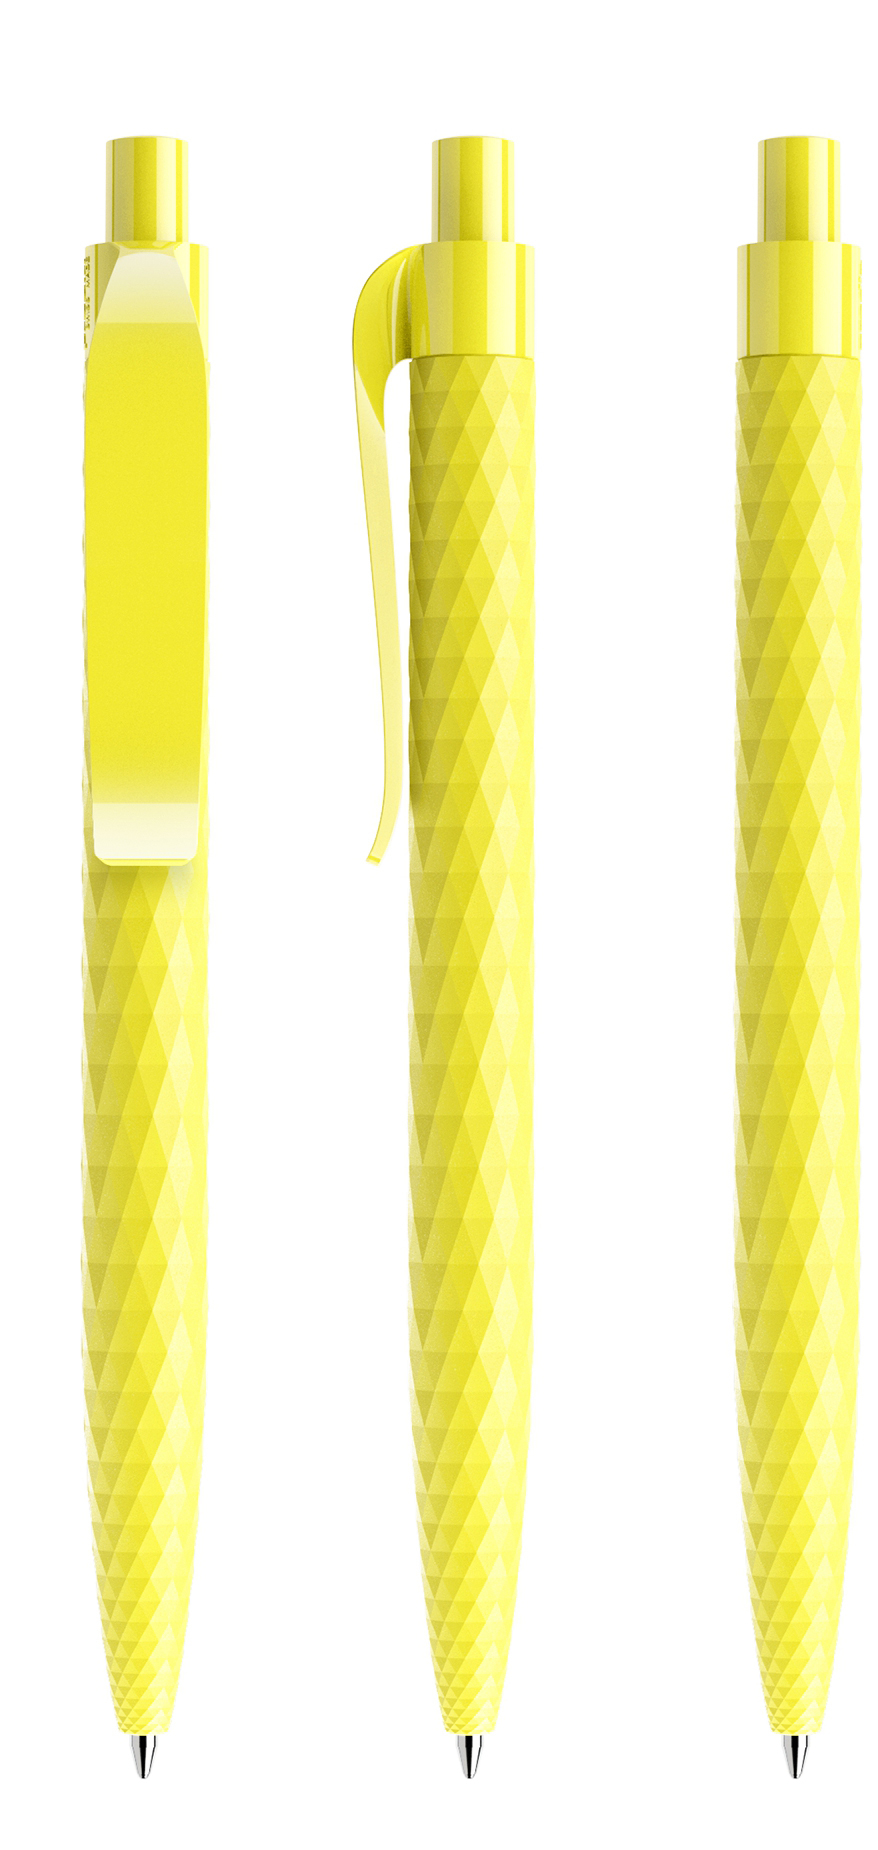 QS01 Touch patterned pen in yellow